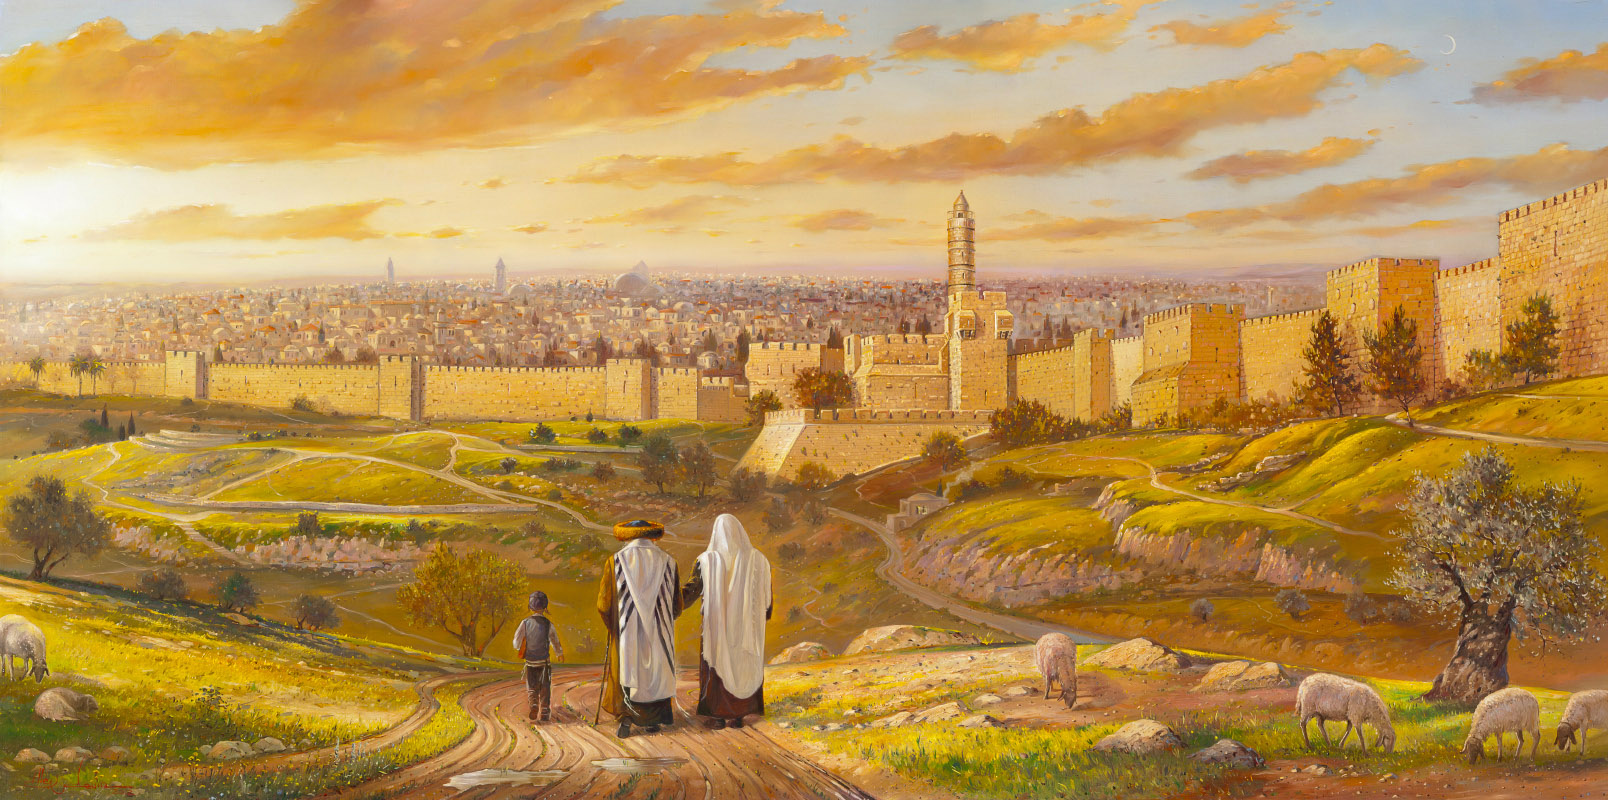 Image for Eric Cohen: “The Message From Jerusalem”